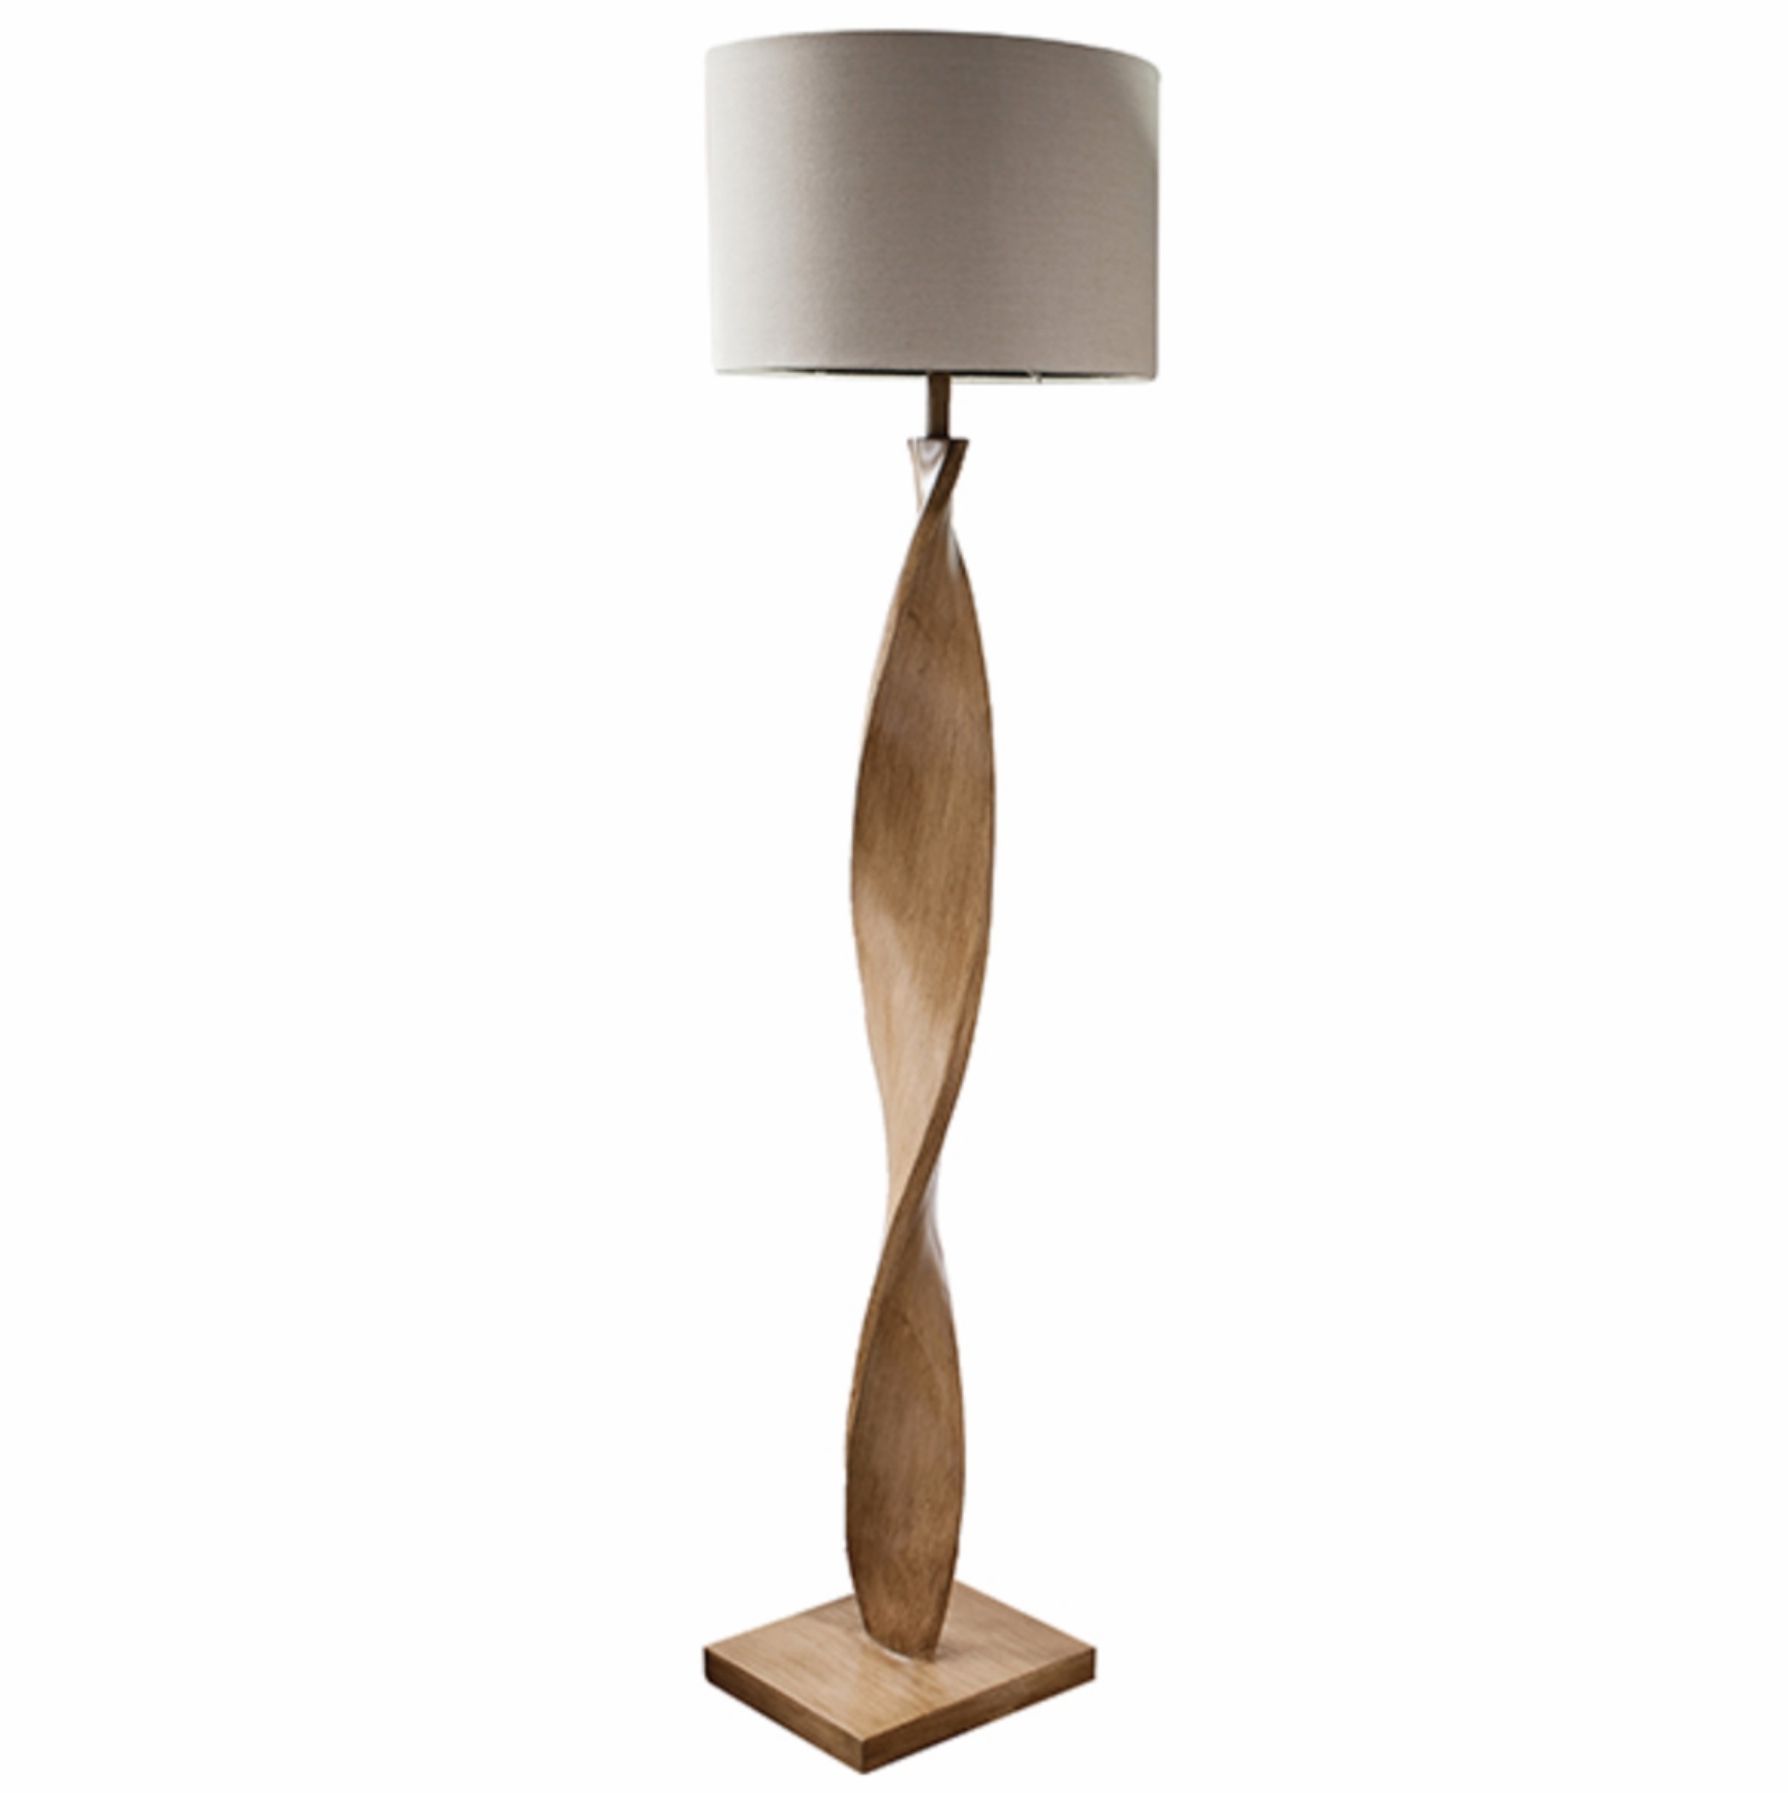 Widely Used Oak Standing Lamps Intended For Arthur – Wooden Twist Floor Lamp And Natural Linen Shade – Lightbox (View 14 of 15)